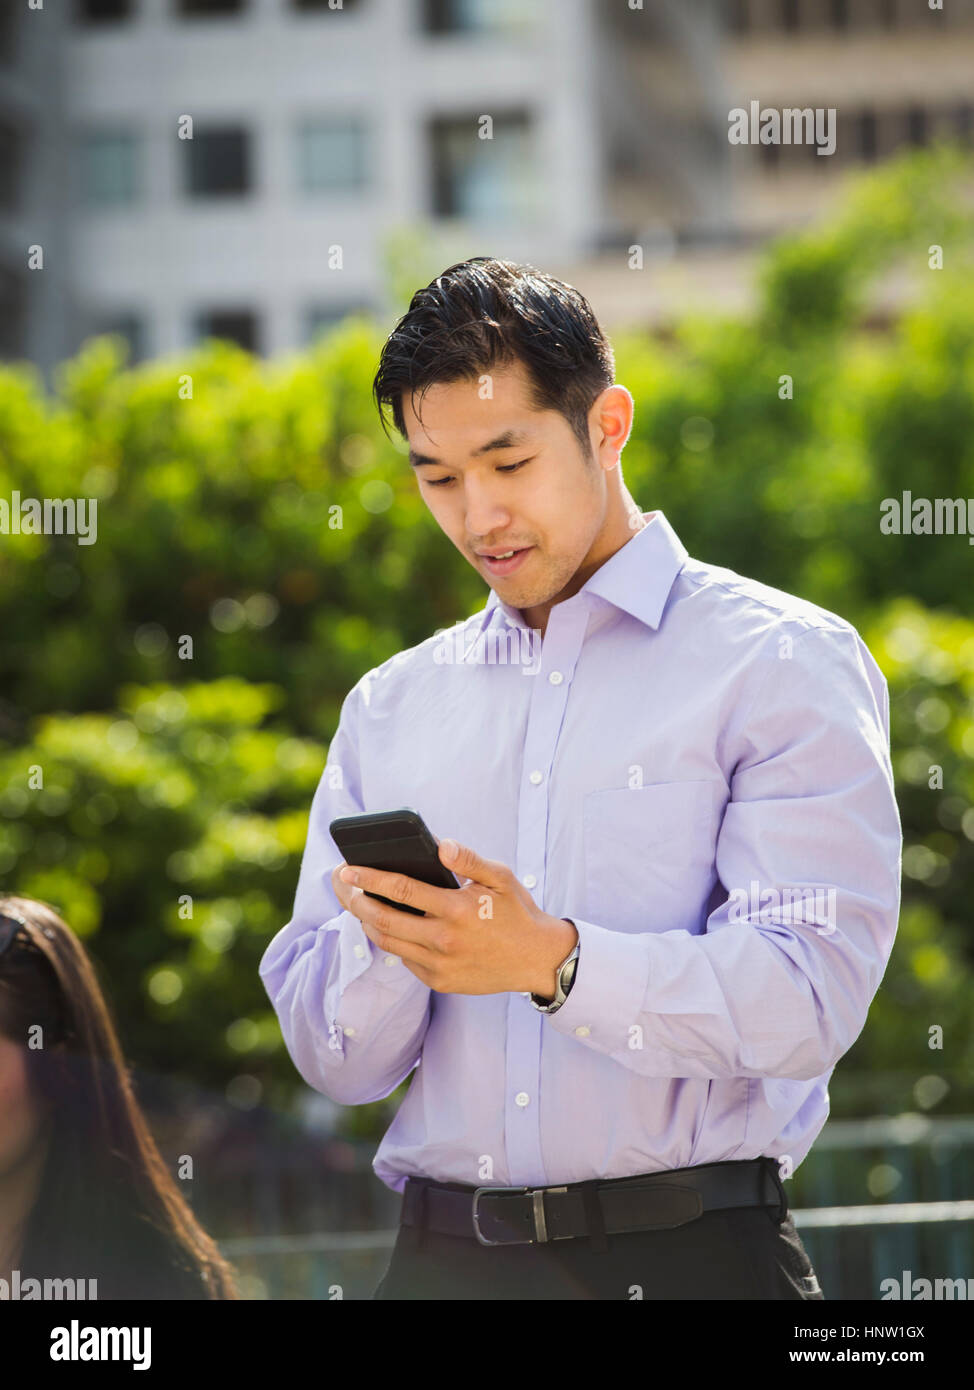 Chinese businessman texting on cell phone outdoors Banque D'Images